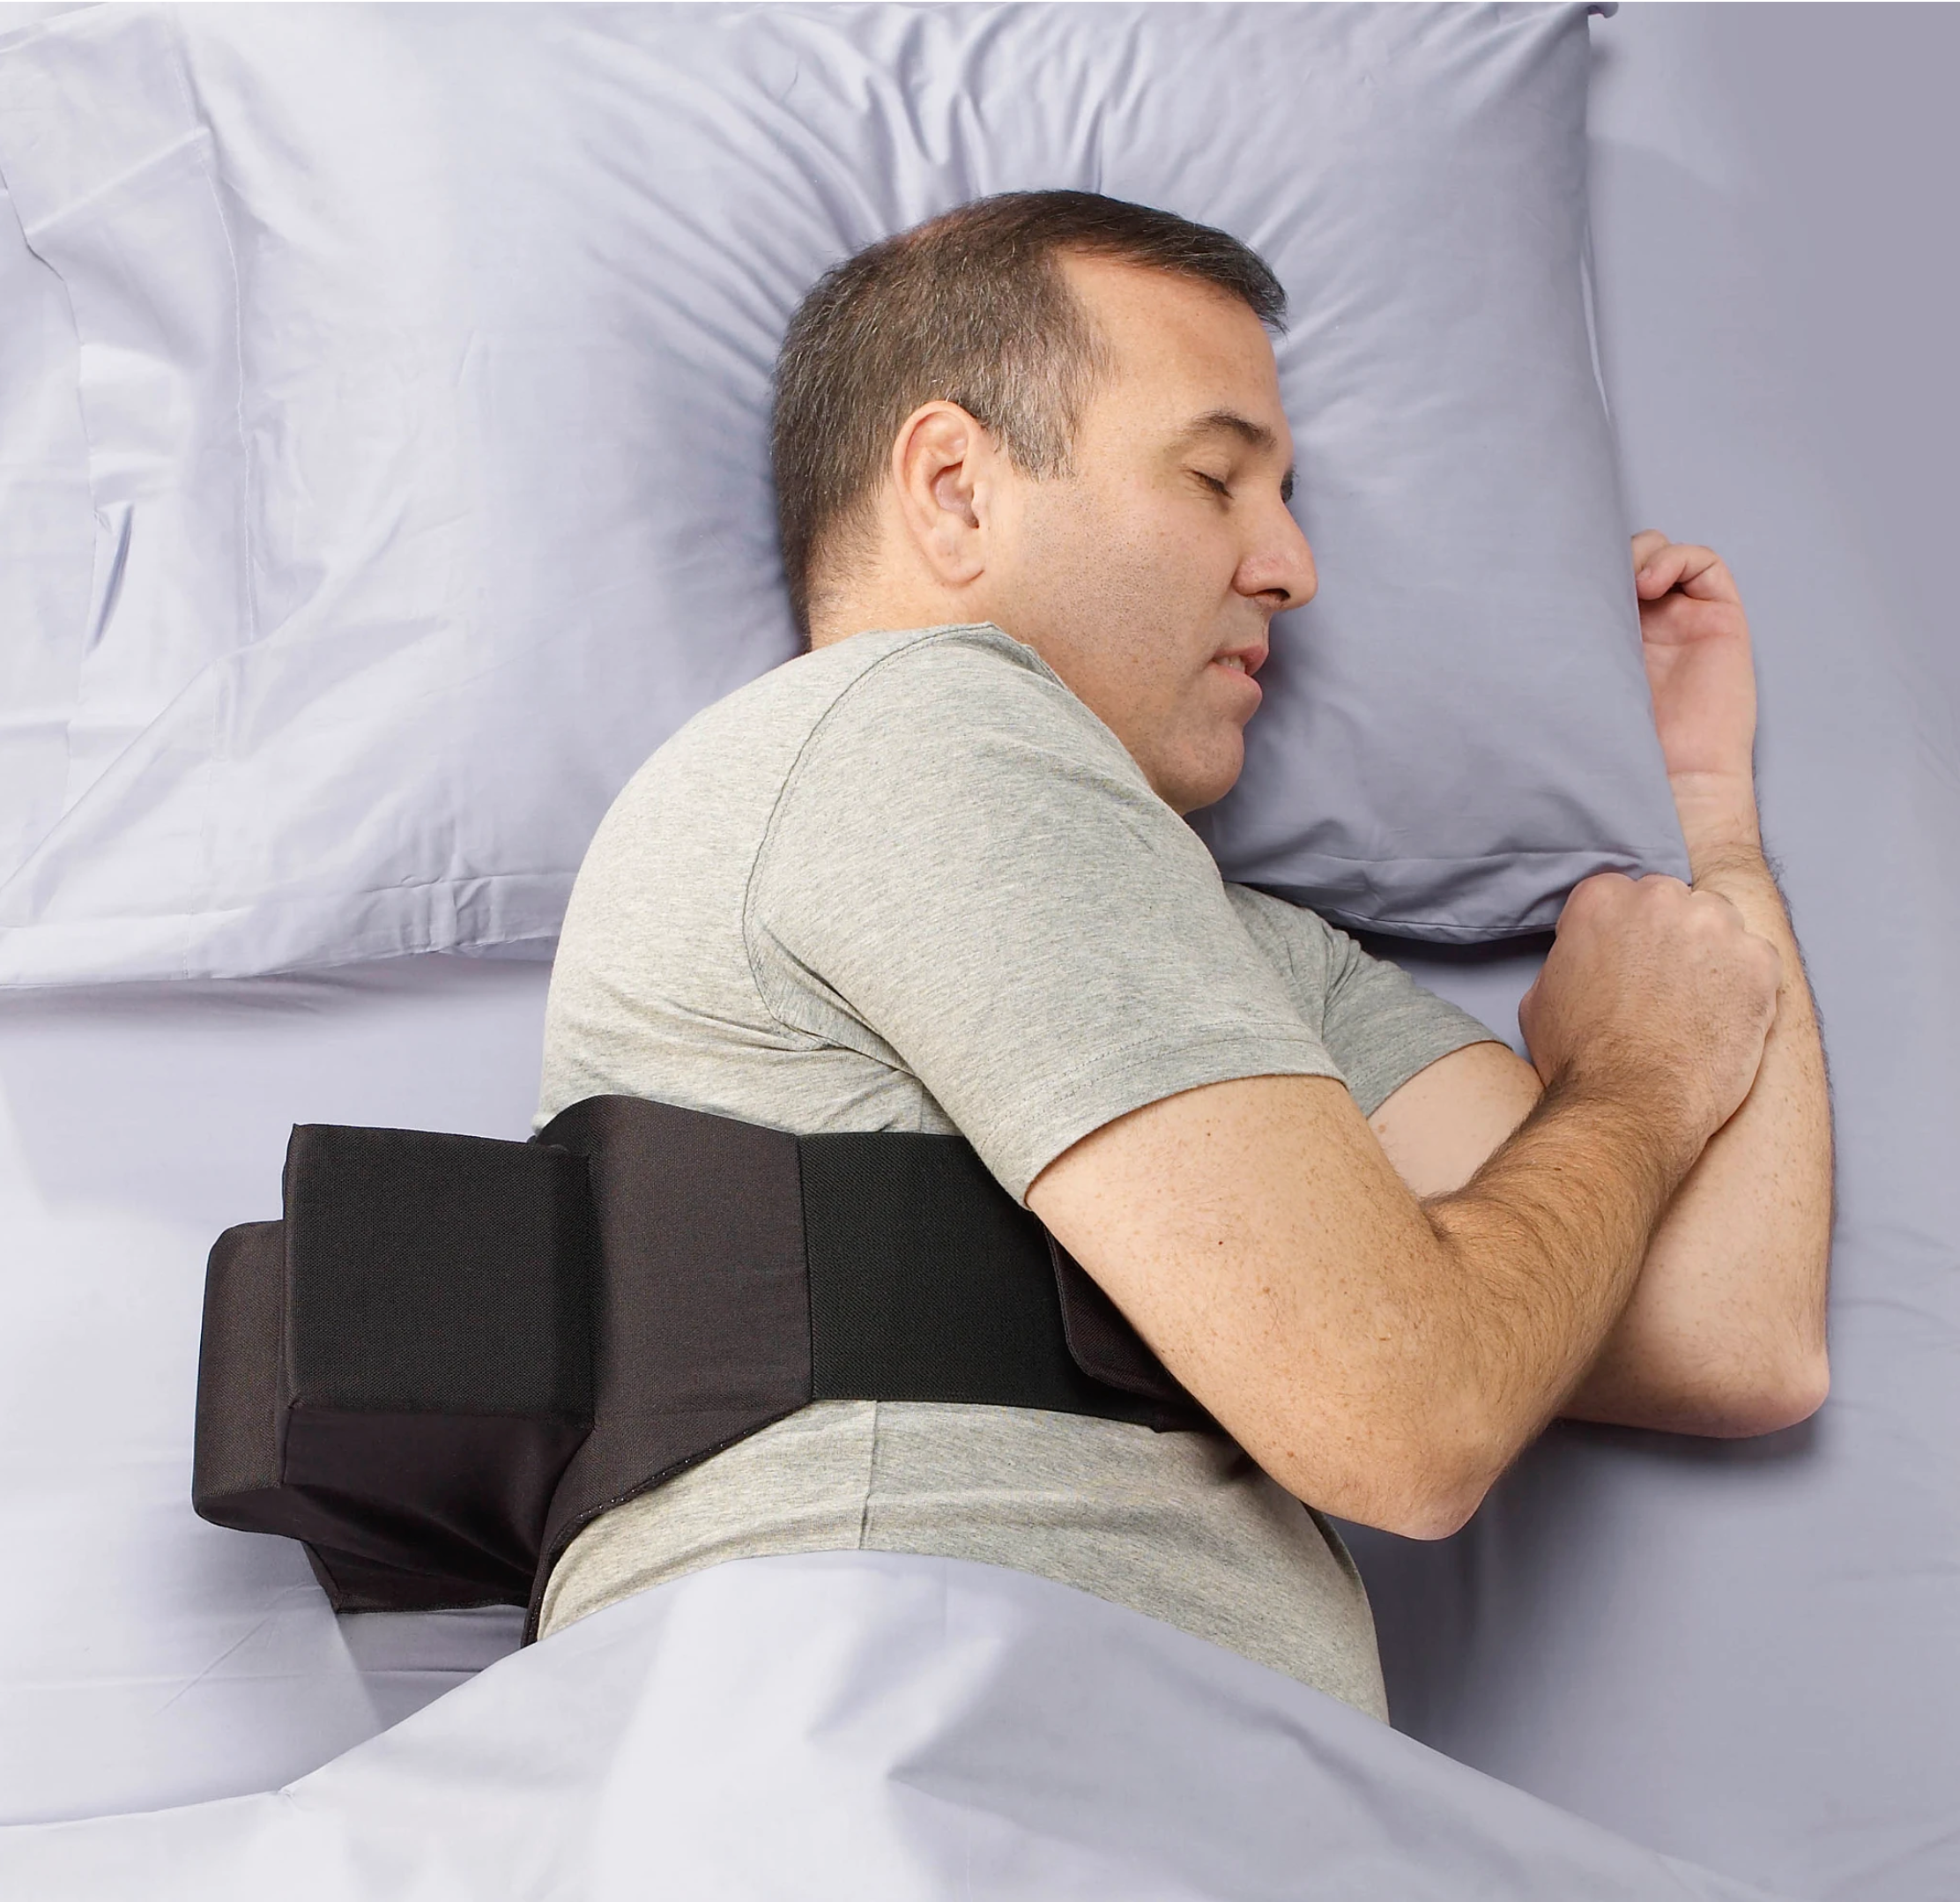 An image of a person lying on their left side, wearing the Zzoma positional sleep device for OSA & snoring.